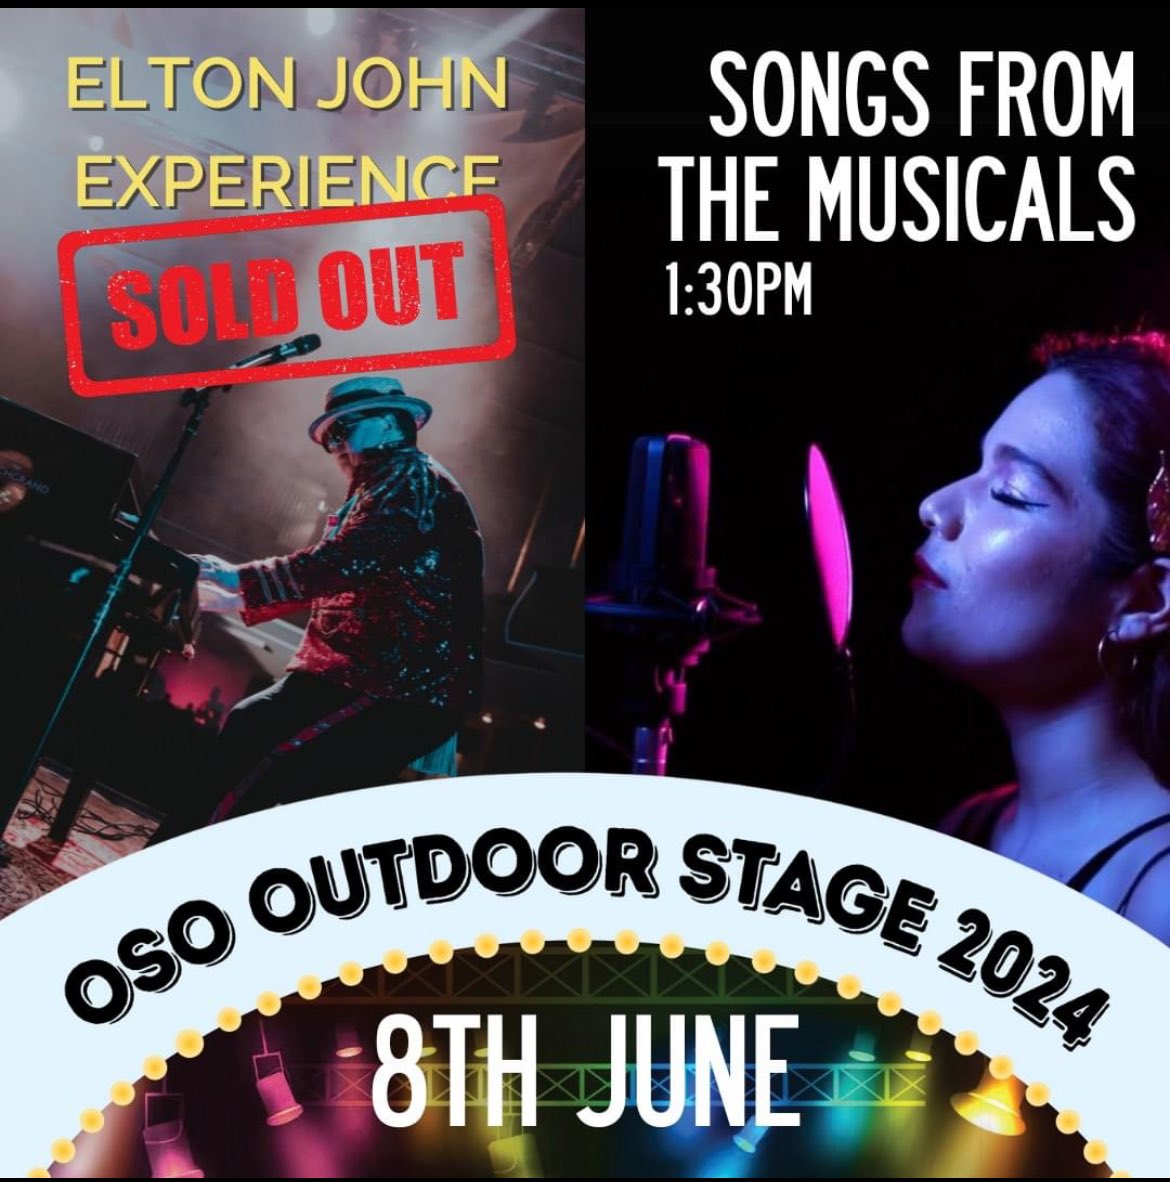 Elton John may be sold out but we still have tickets for Songs from the Musicals!! Sing along to your favourites from Wicked, Mamma Mia, Frozen, Moulin Rouge, Hamilton, Grease, Les Mis and more, sung by West End performers. Thank you to our sponsors @laurentresi and @BindmansLLP